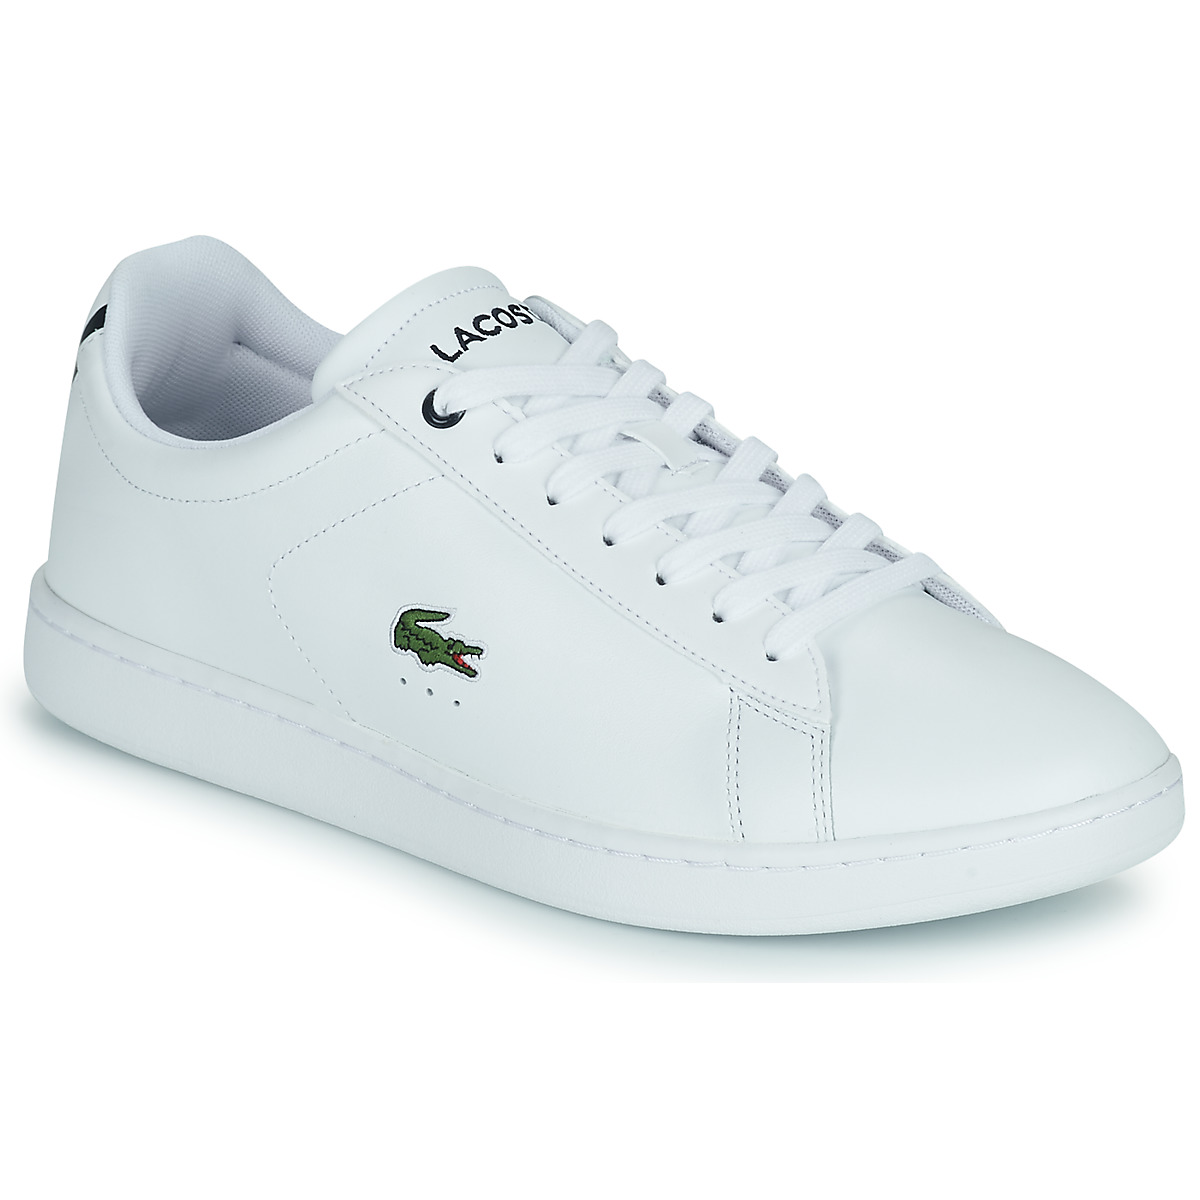 Lacoste Carnaby Bl21 1 Sma White